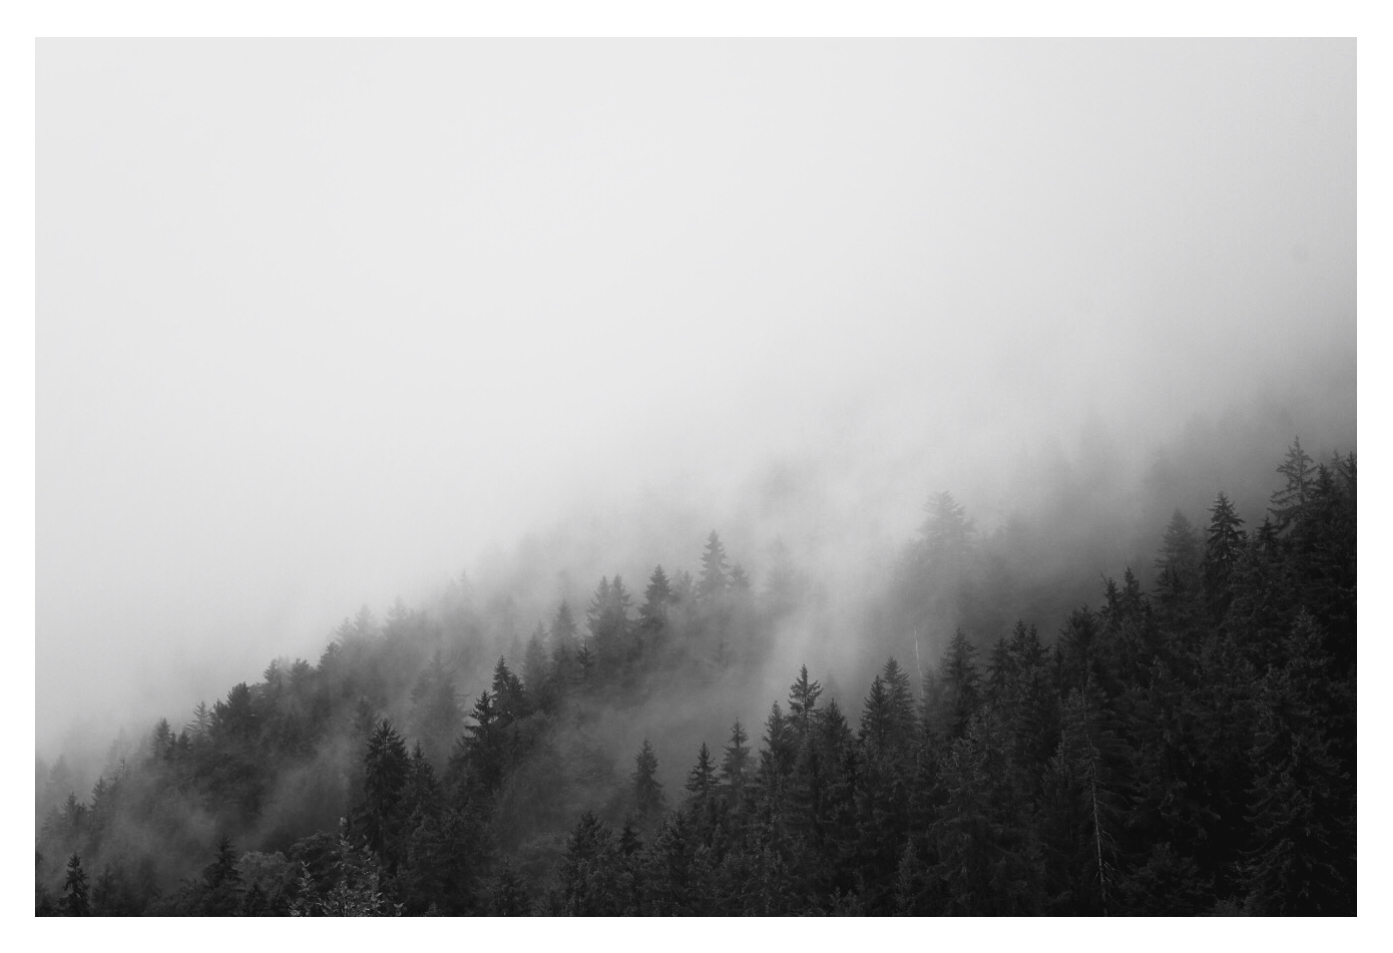 Moody black and white photo of a misty mountain